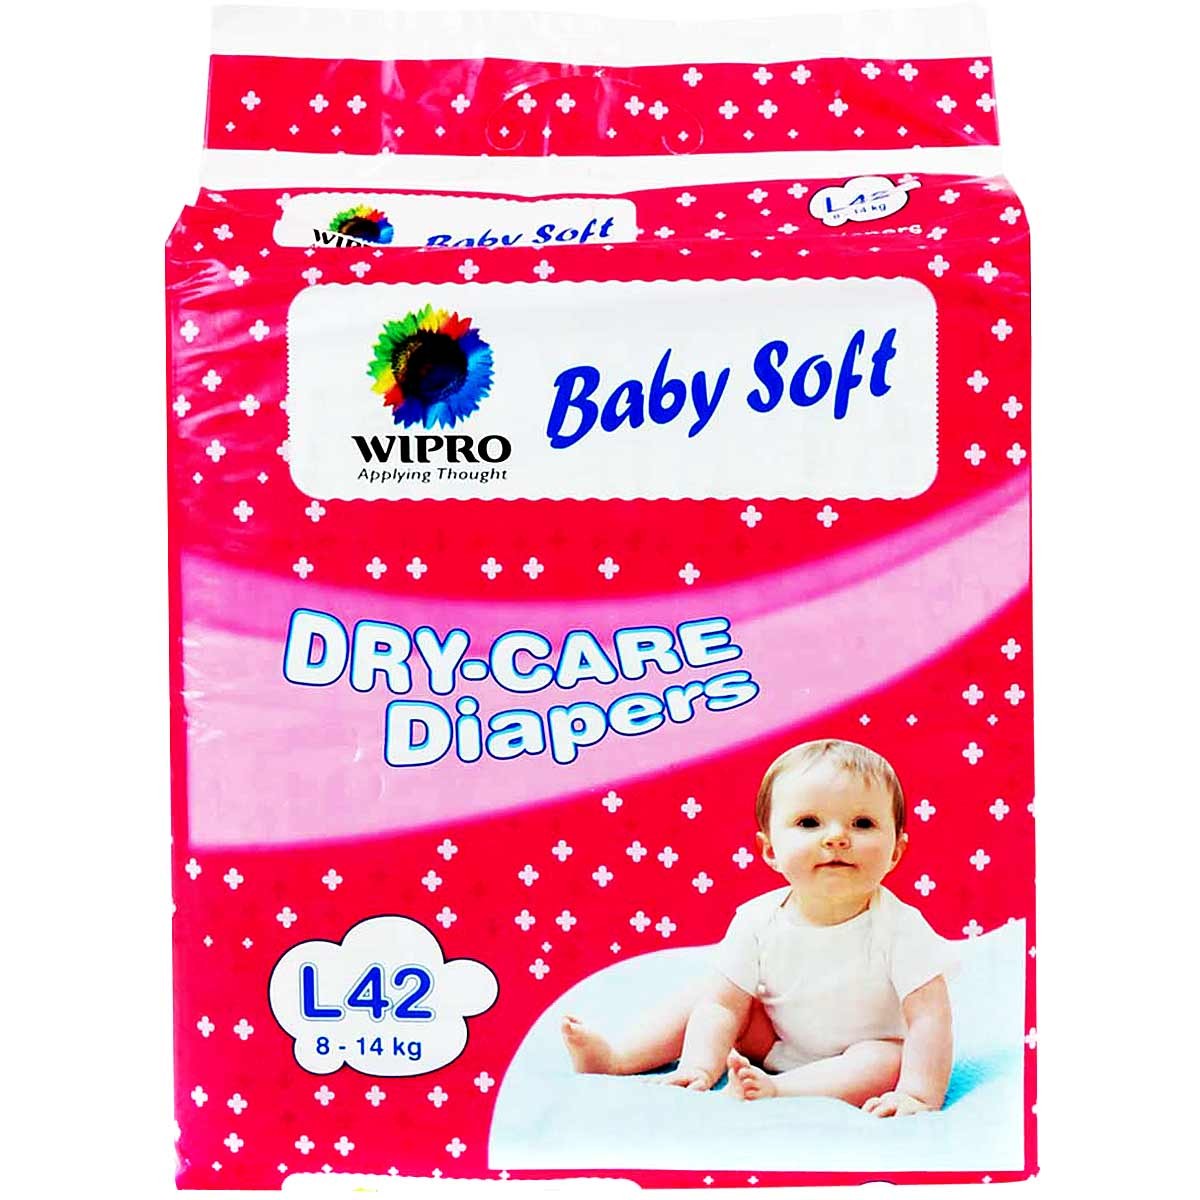 Wipro Baby Soft Dry Care Diapers - Large 8-14 kg